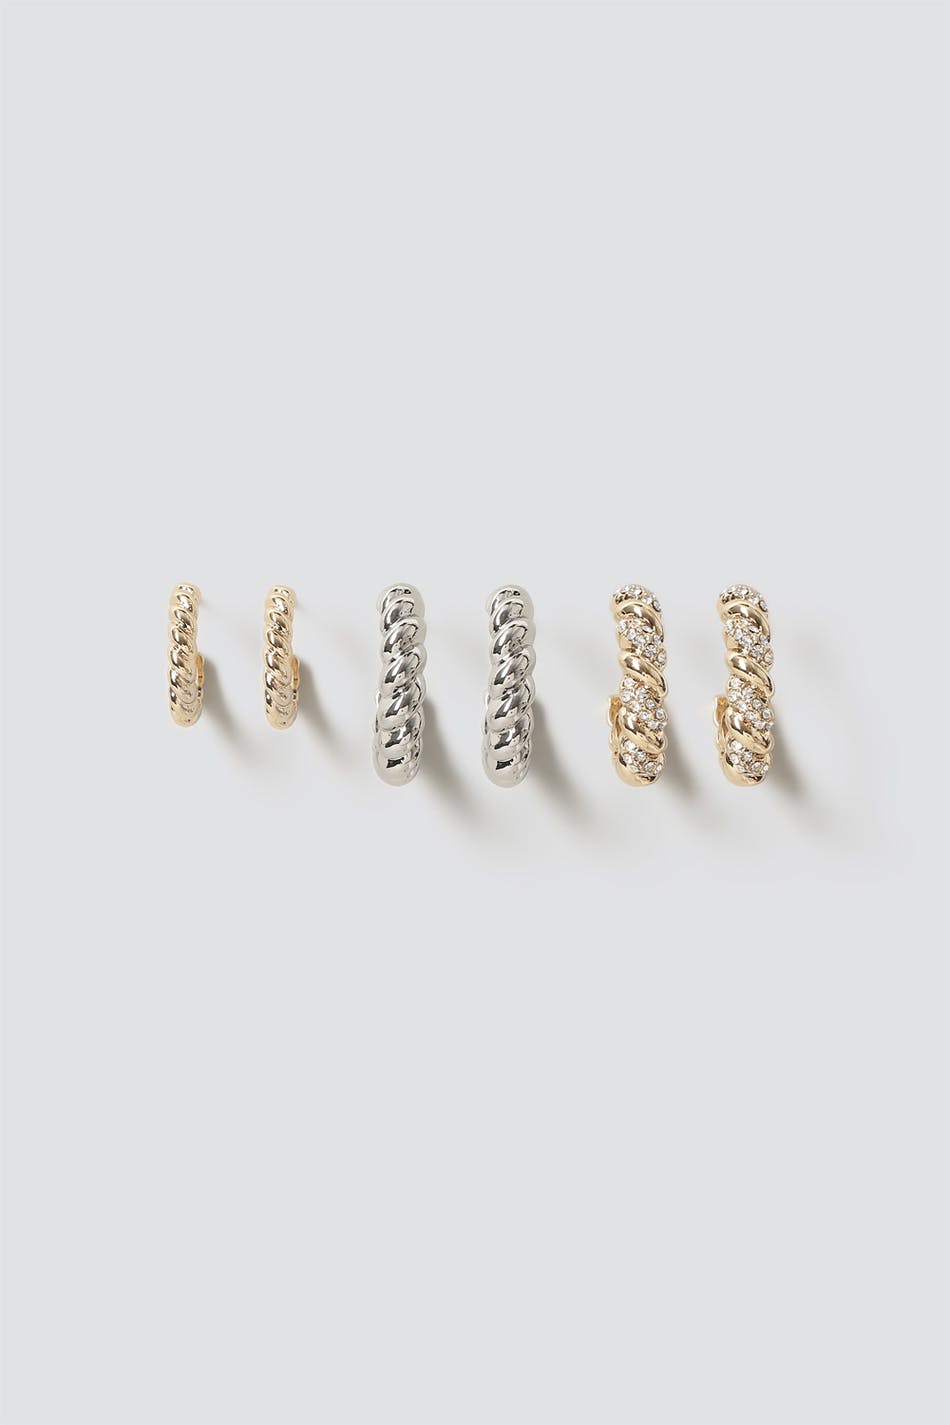 Gina Tricot Pave and Twist Mixed Metal Earring Pack one size  Crystal